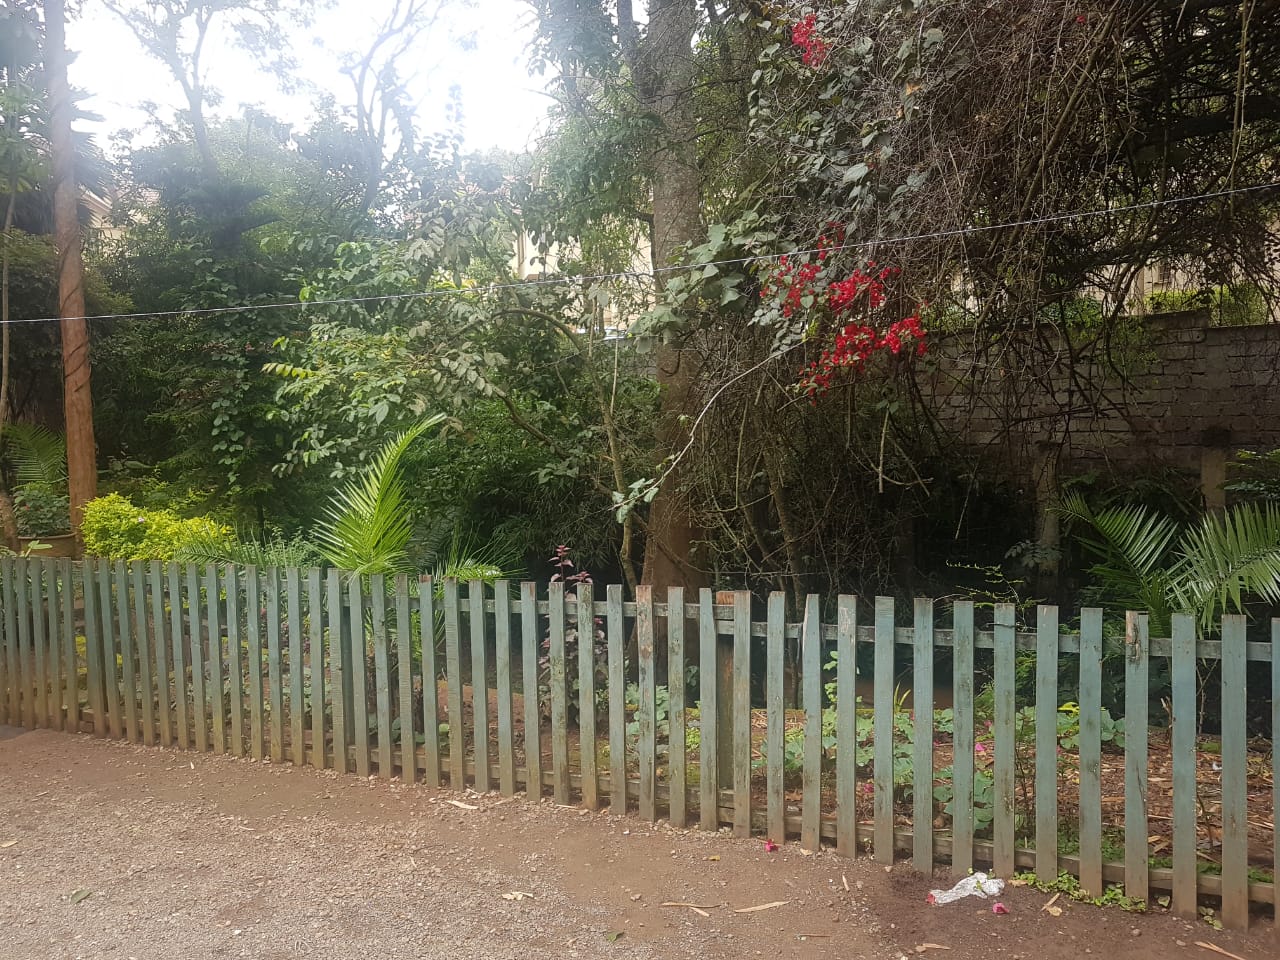 Prime Land for Sale on Peponi Road Ideal for Redevelopment of Town Houses at Ksh165M negotiable11